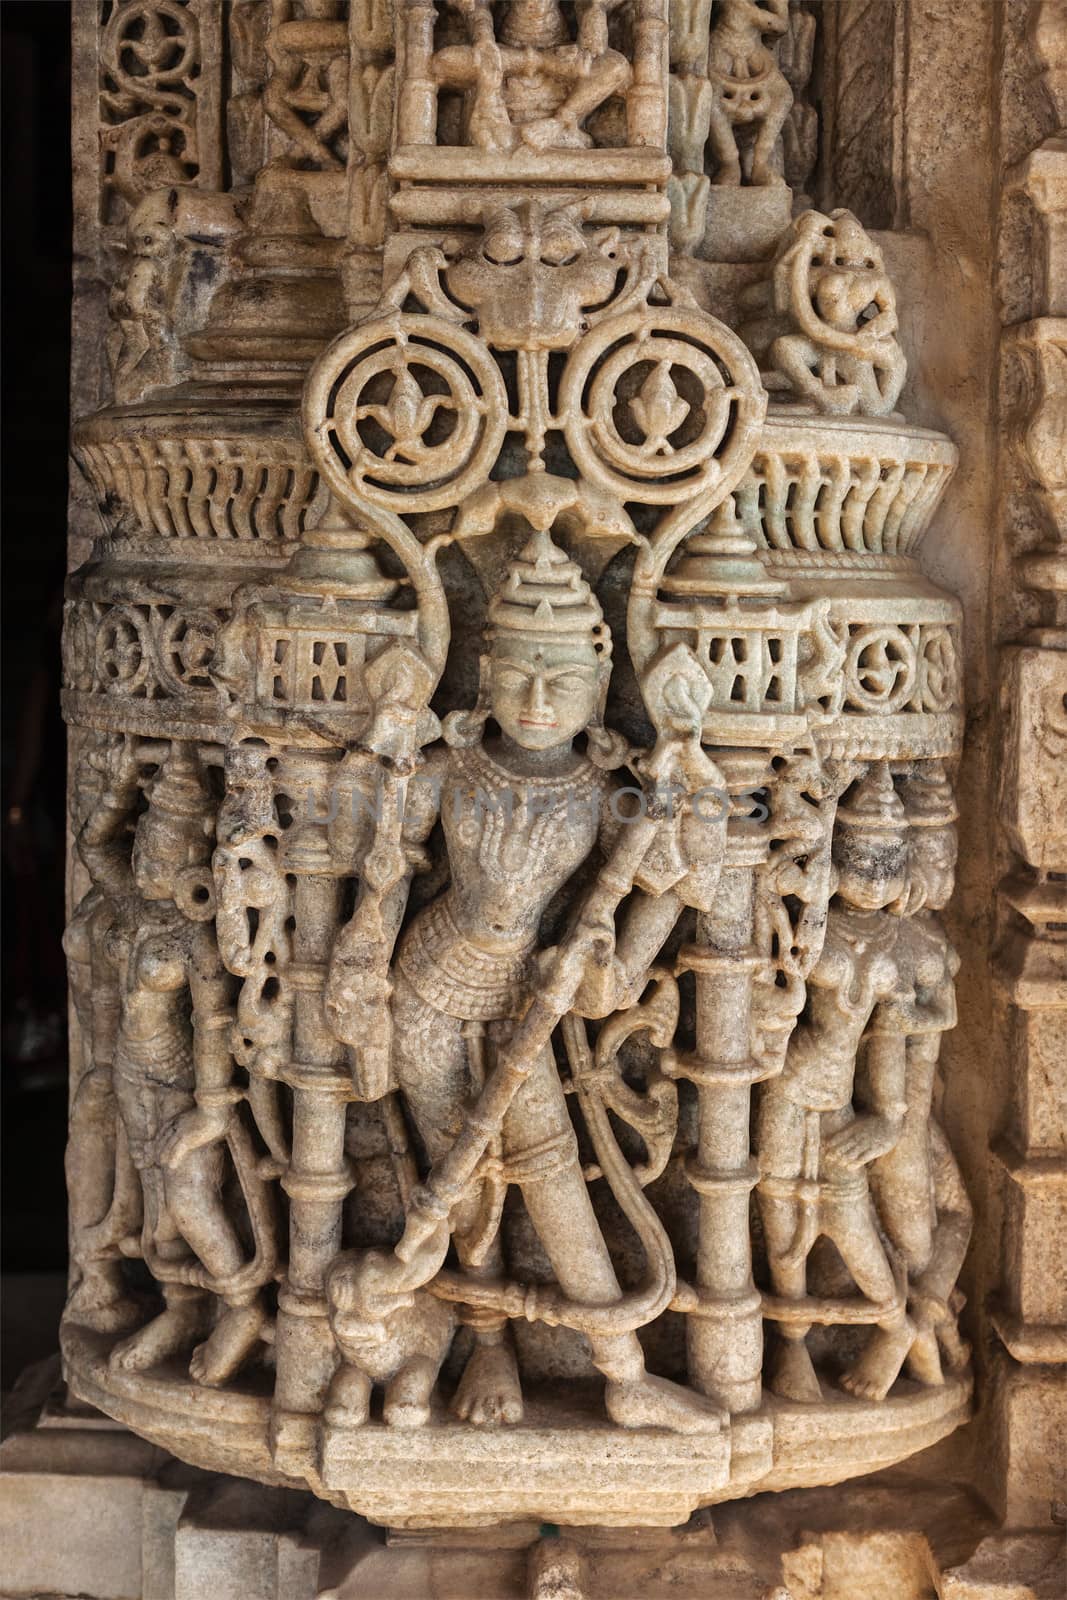 Stone carving in Ranakpur temple, Rajasthan by dimol